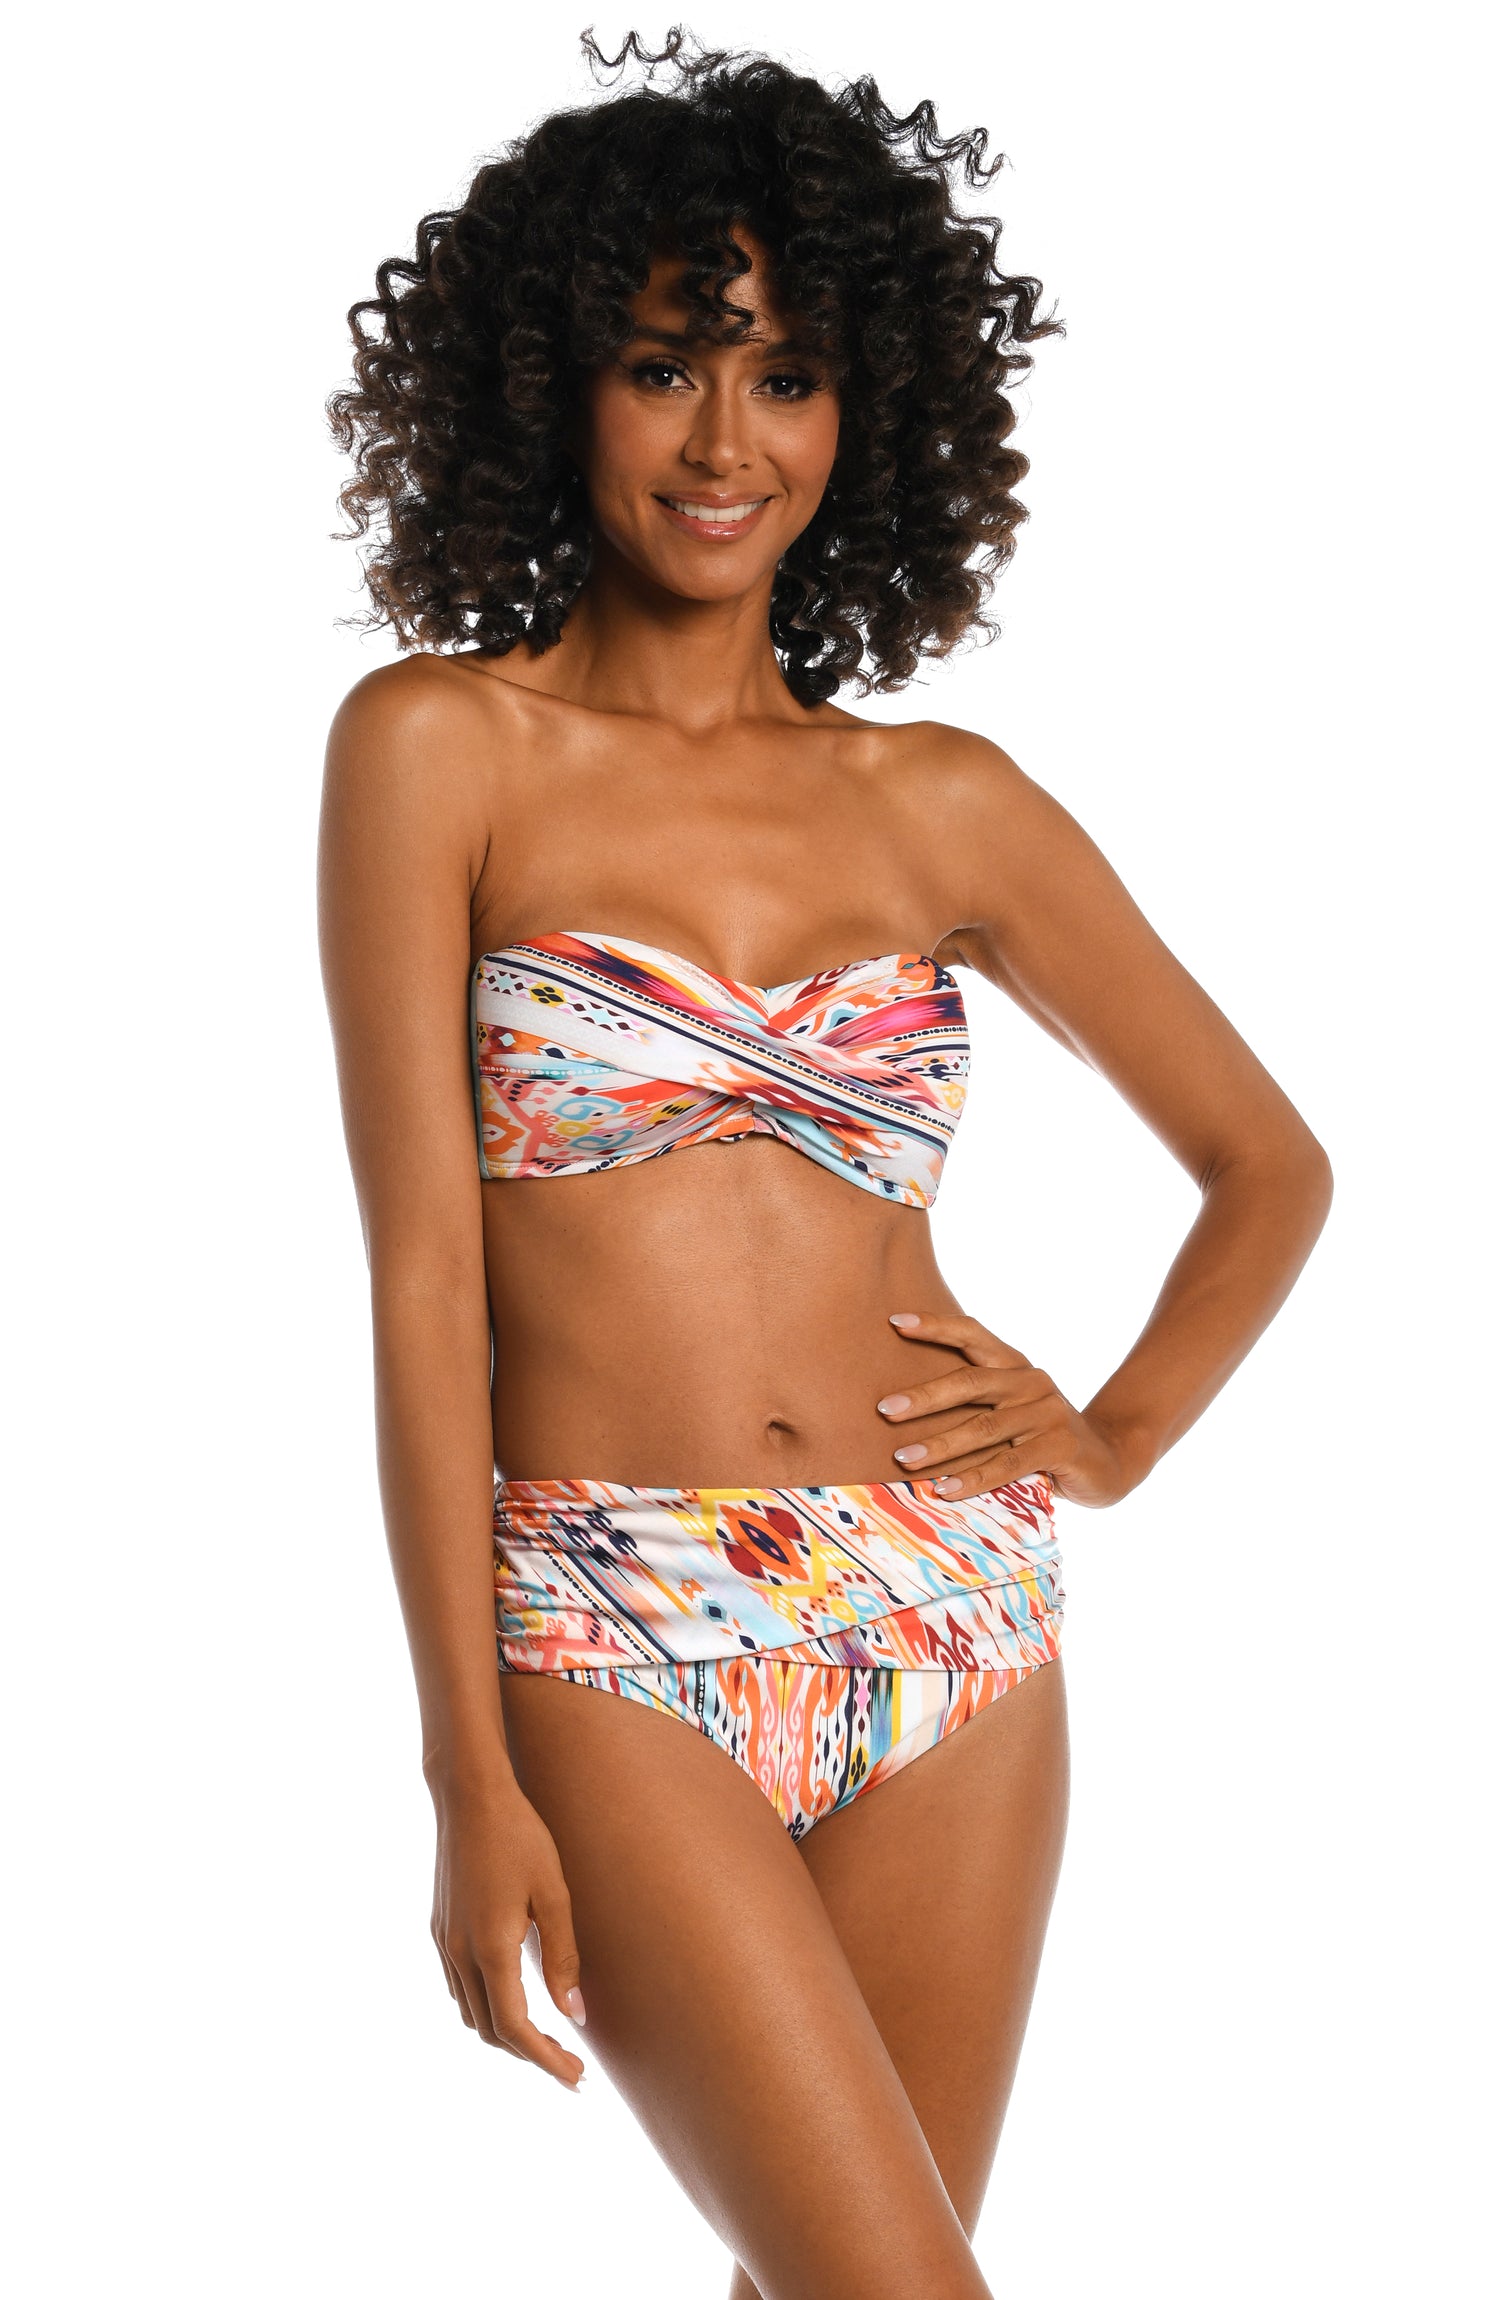 Model is wearing a multi colored tribal printed bandeau top from our Desert Dream collection!